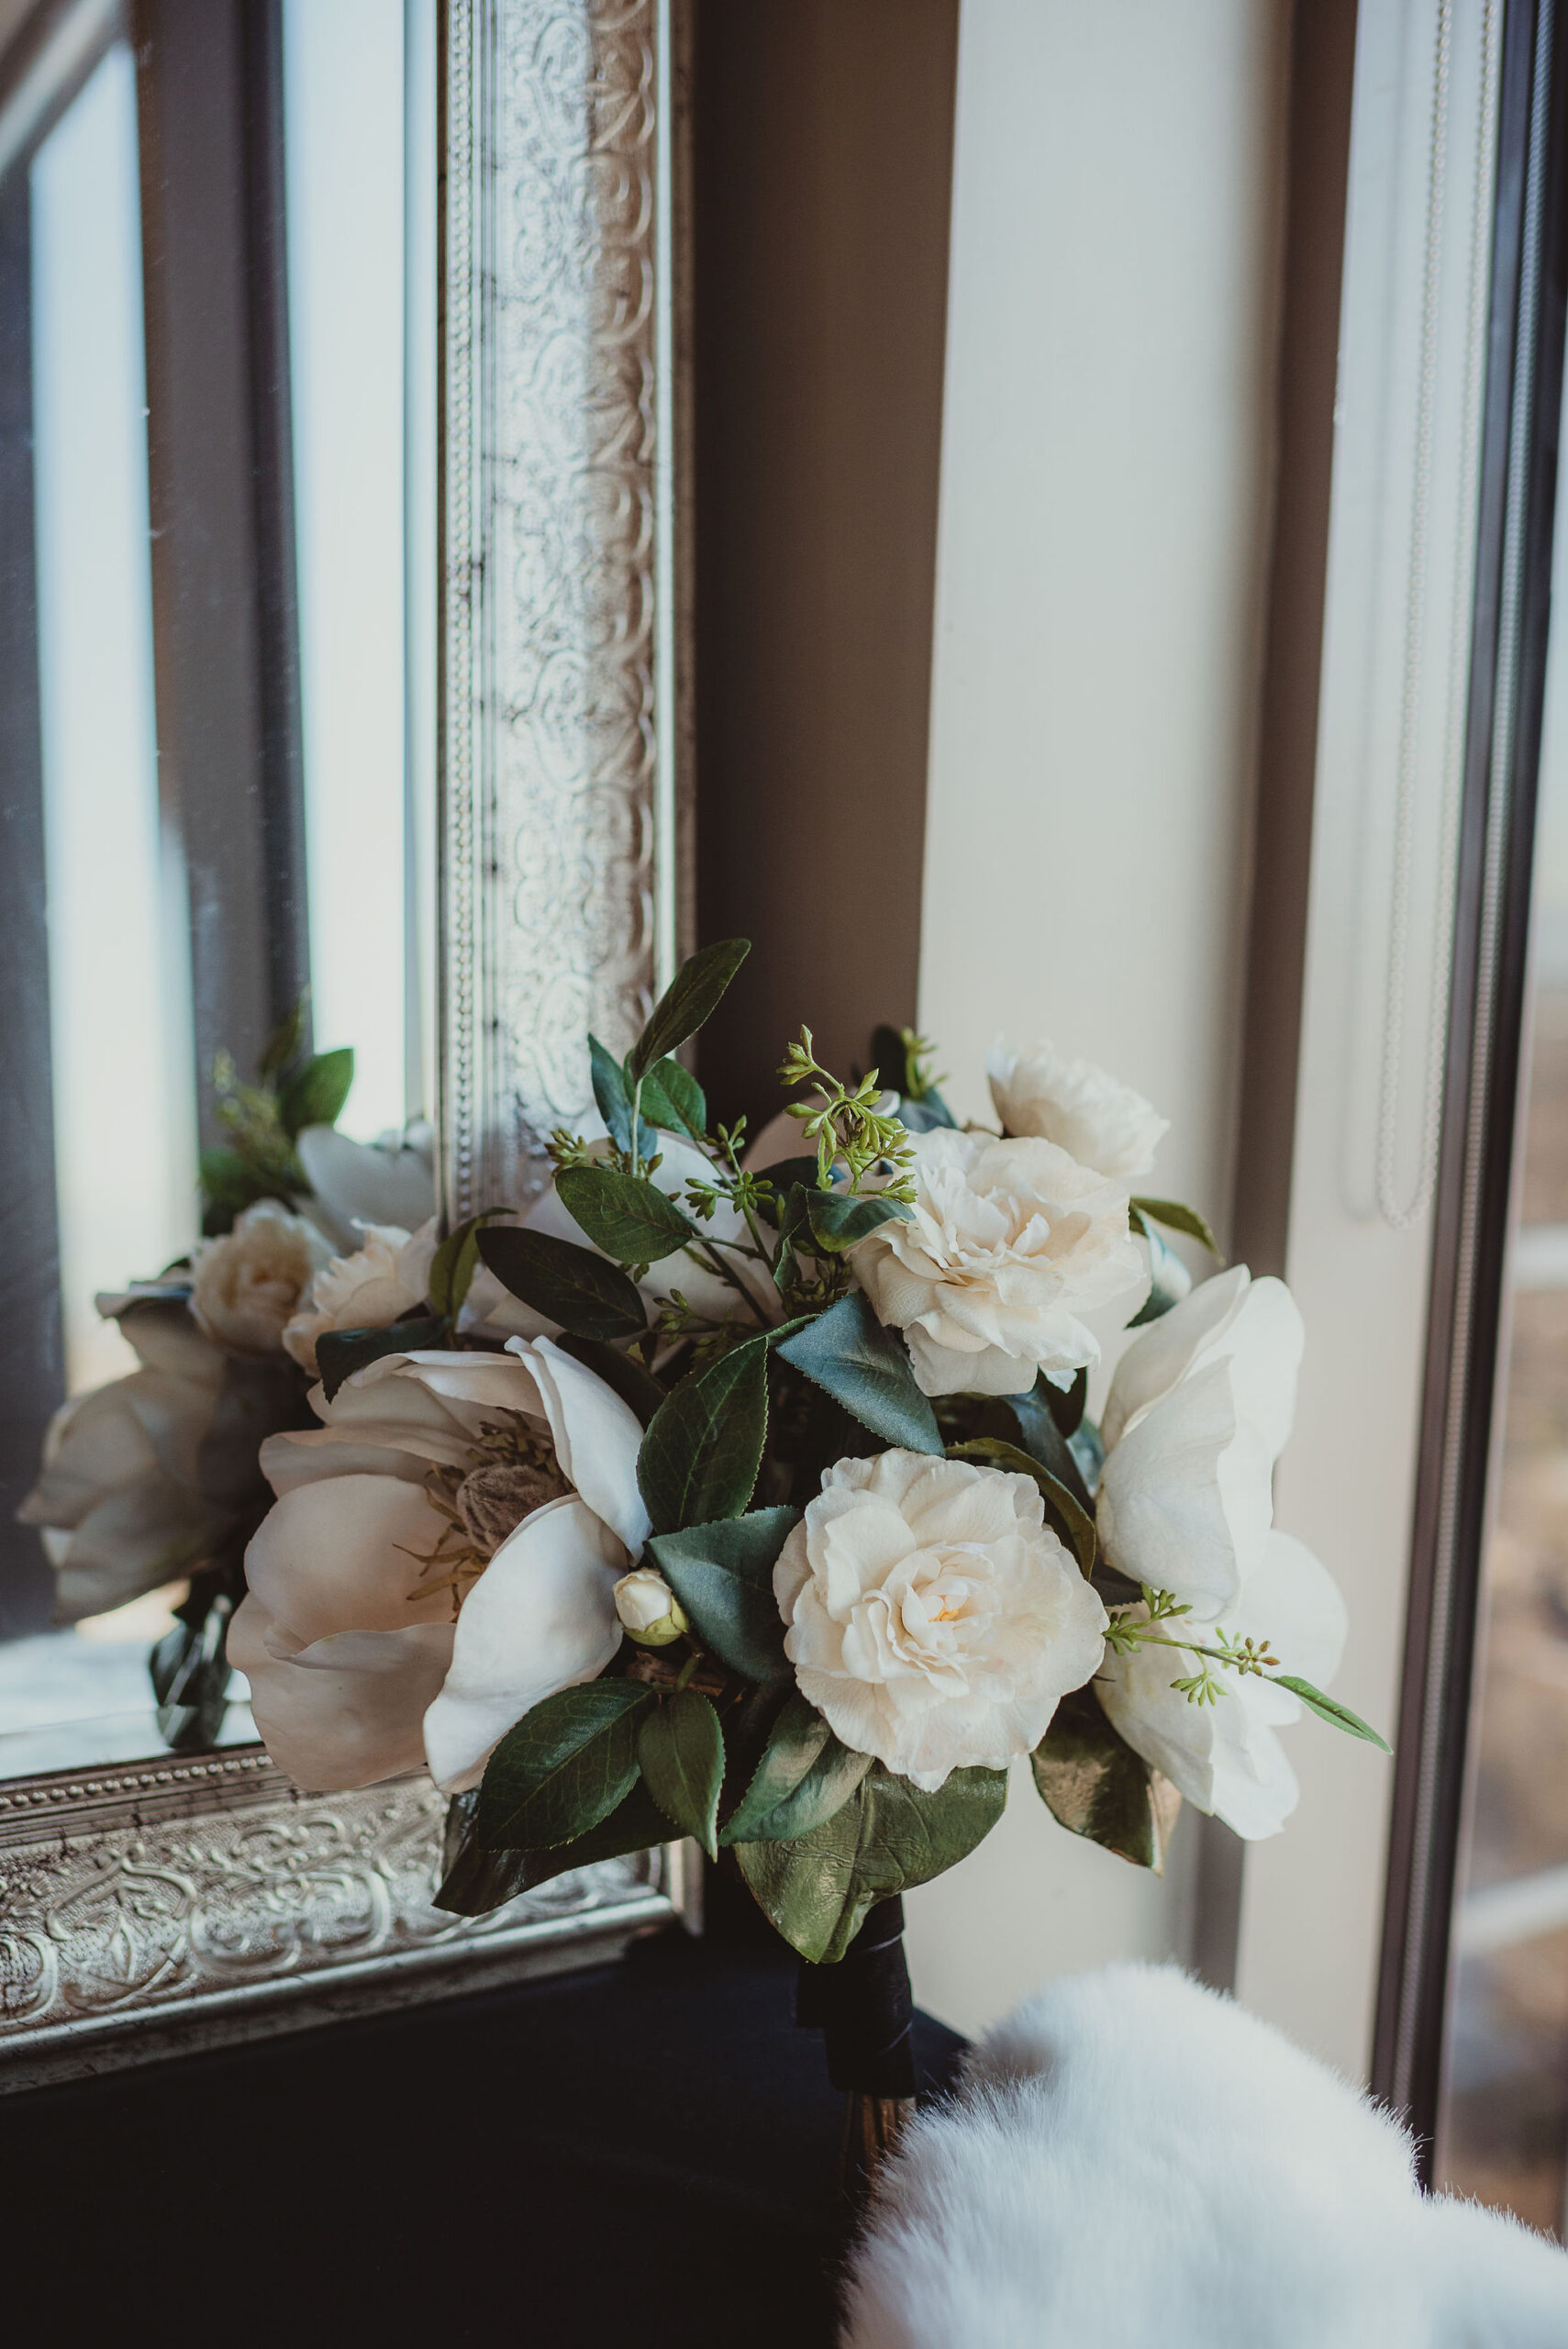 A faux floral bouquet featuring magnolia blooms and greenery.